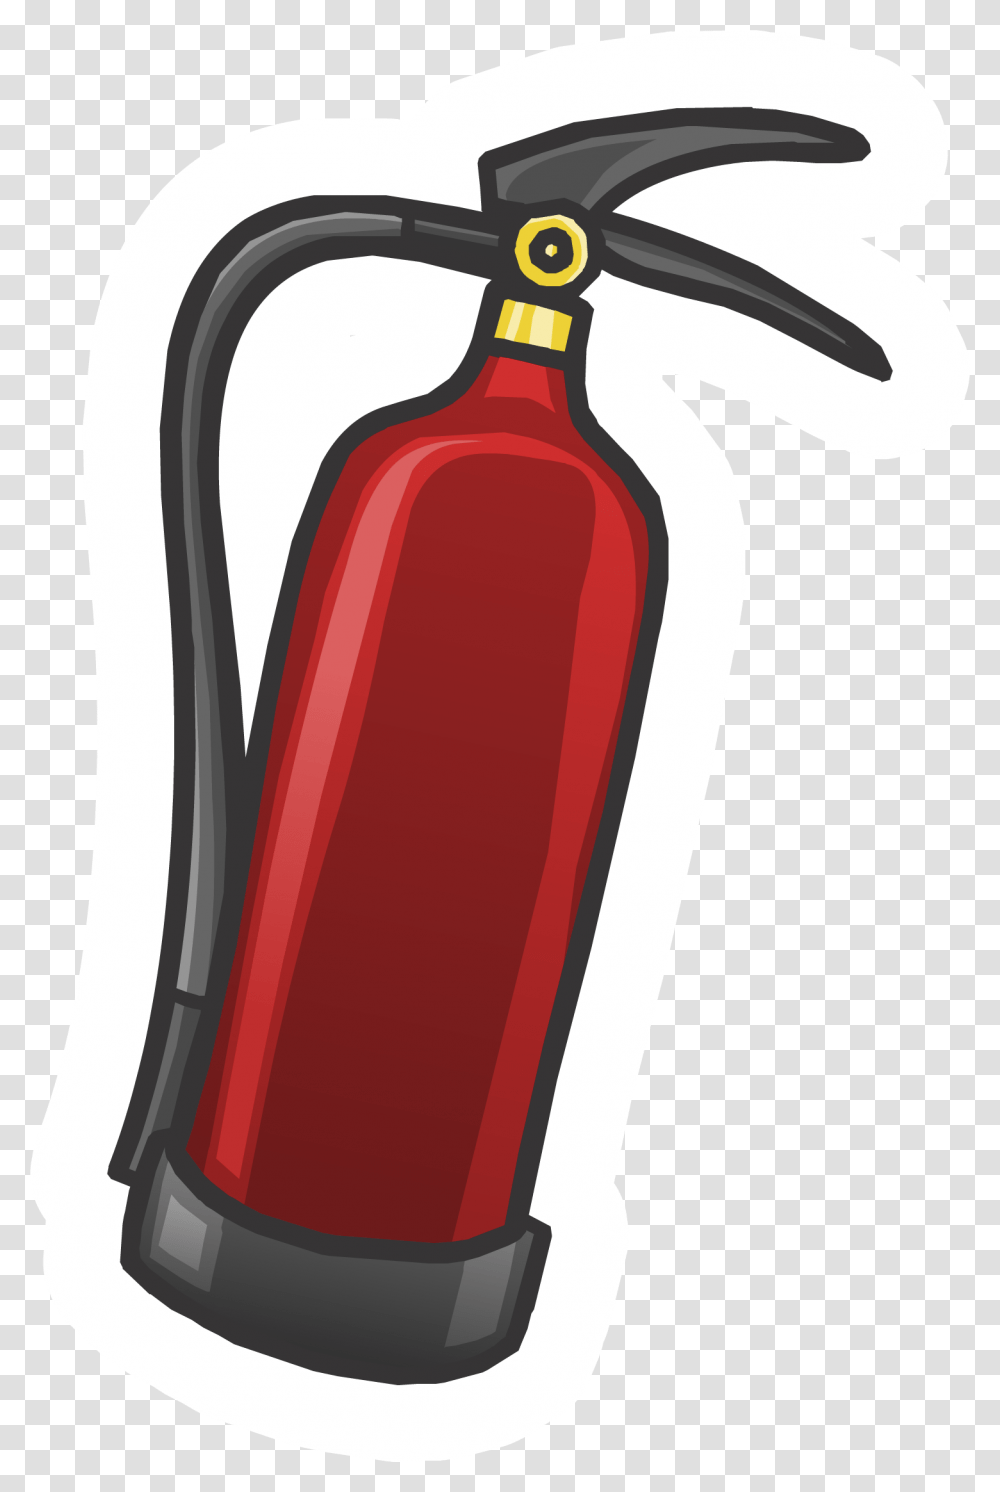 Fire Clipart Suggestions For Fire Clipart Download Fire Extinguisher Cartoon, Gas Pump, Machine, Bottle, Appliance Transparent Png